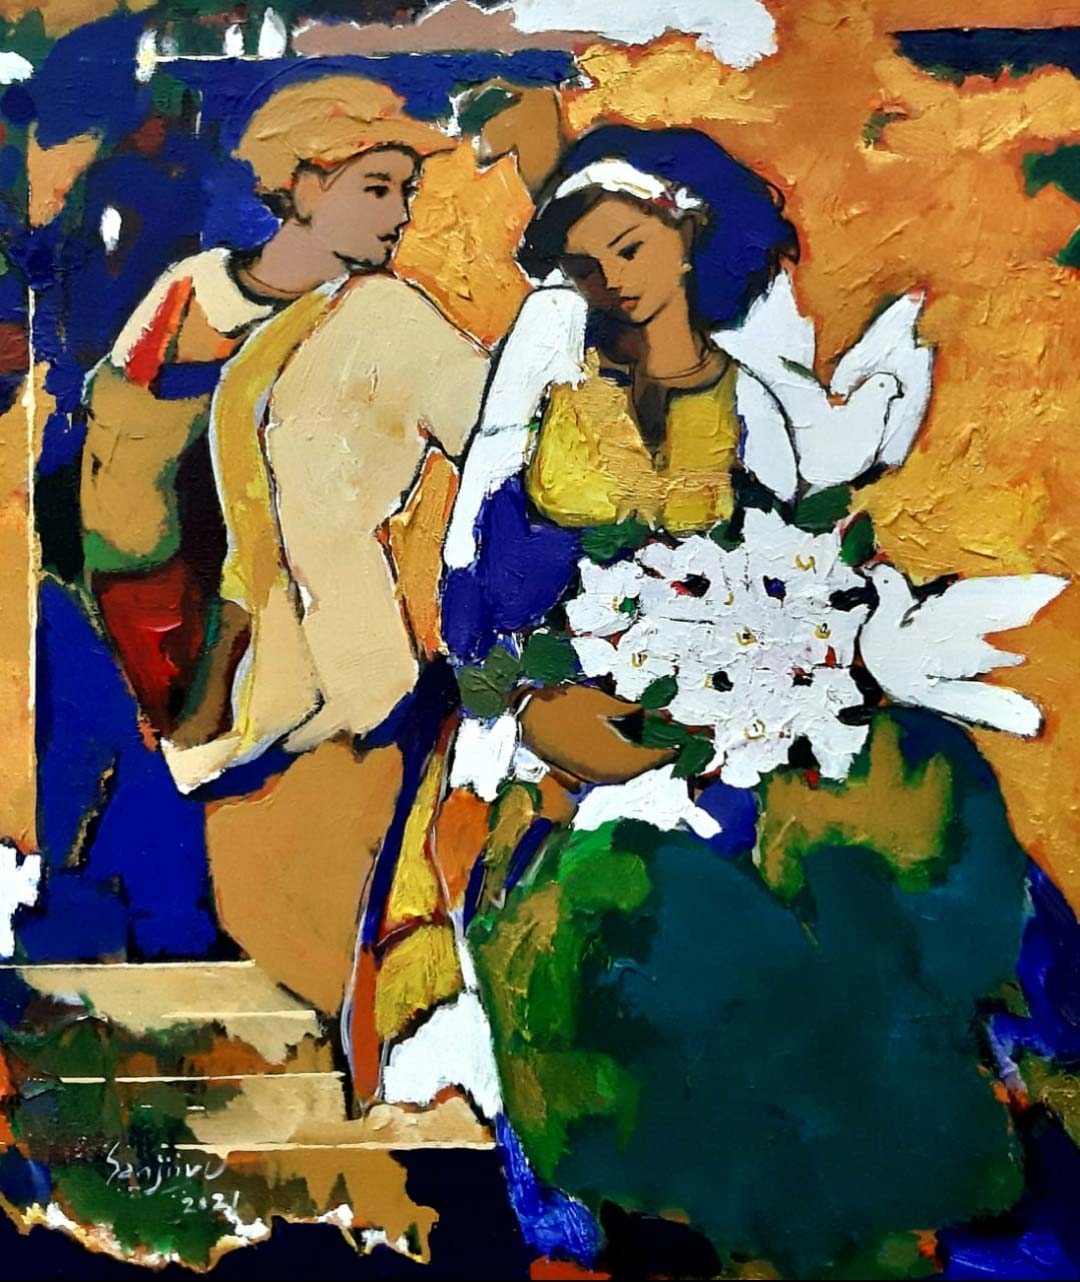 Figurative Painting with Acrylic on Canvas "Untitled-2" art by Sanjiv Sankkpal